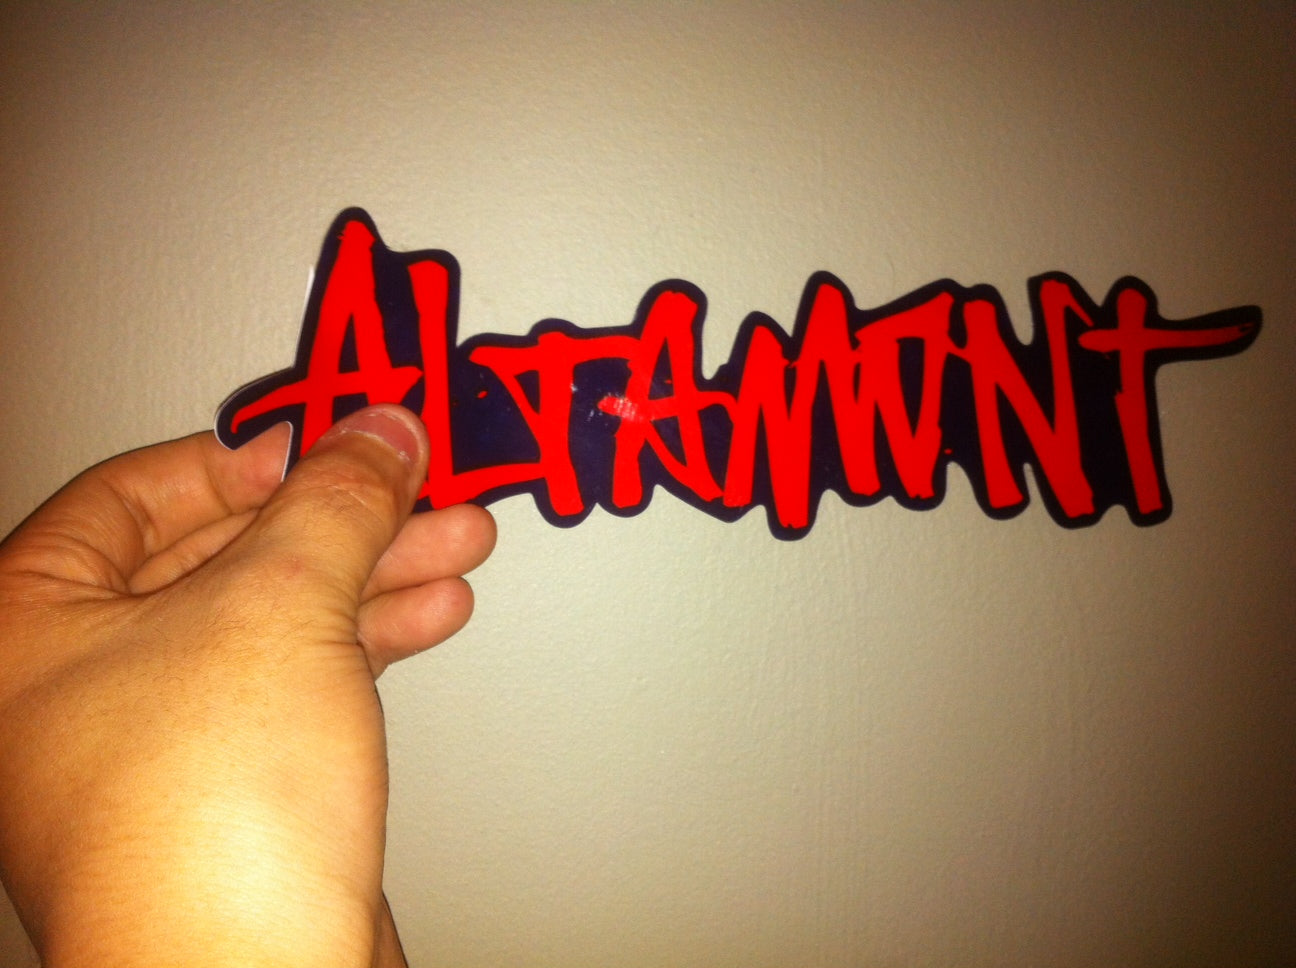 Die Cut, Vinyl Water proof stickers made for Altamont.